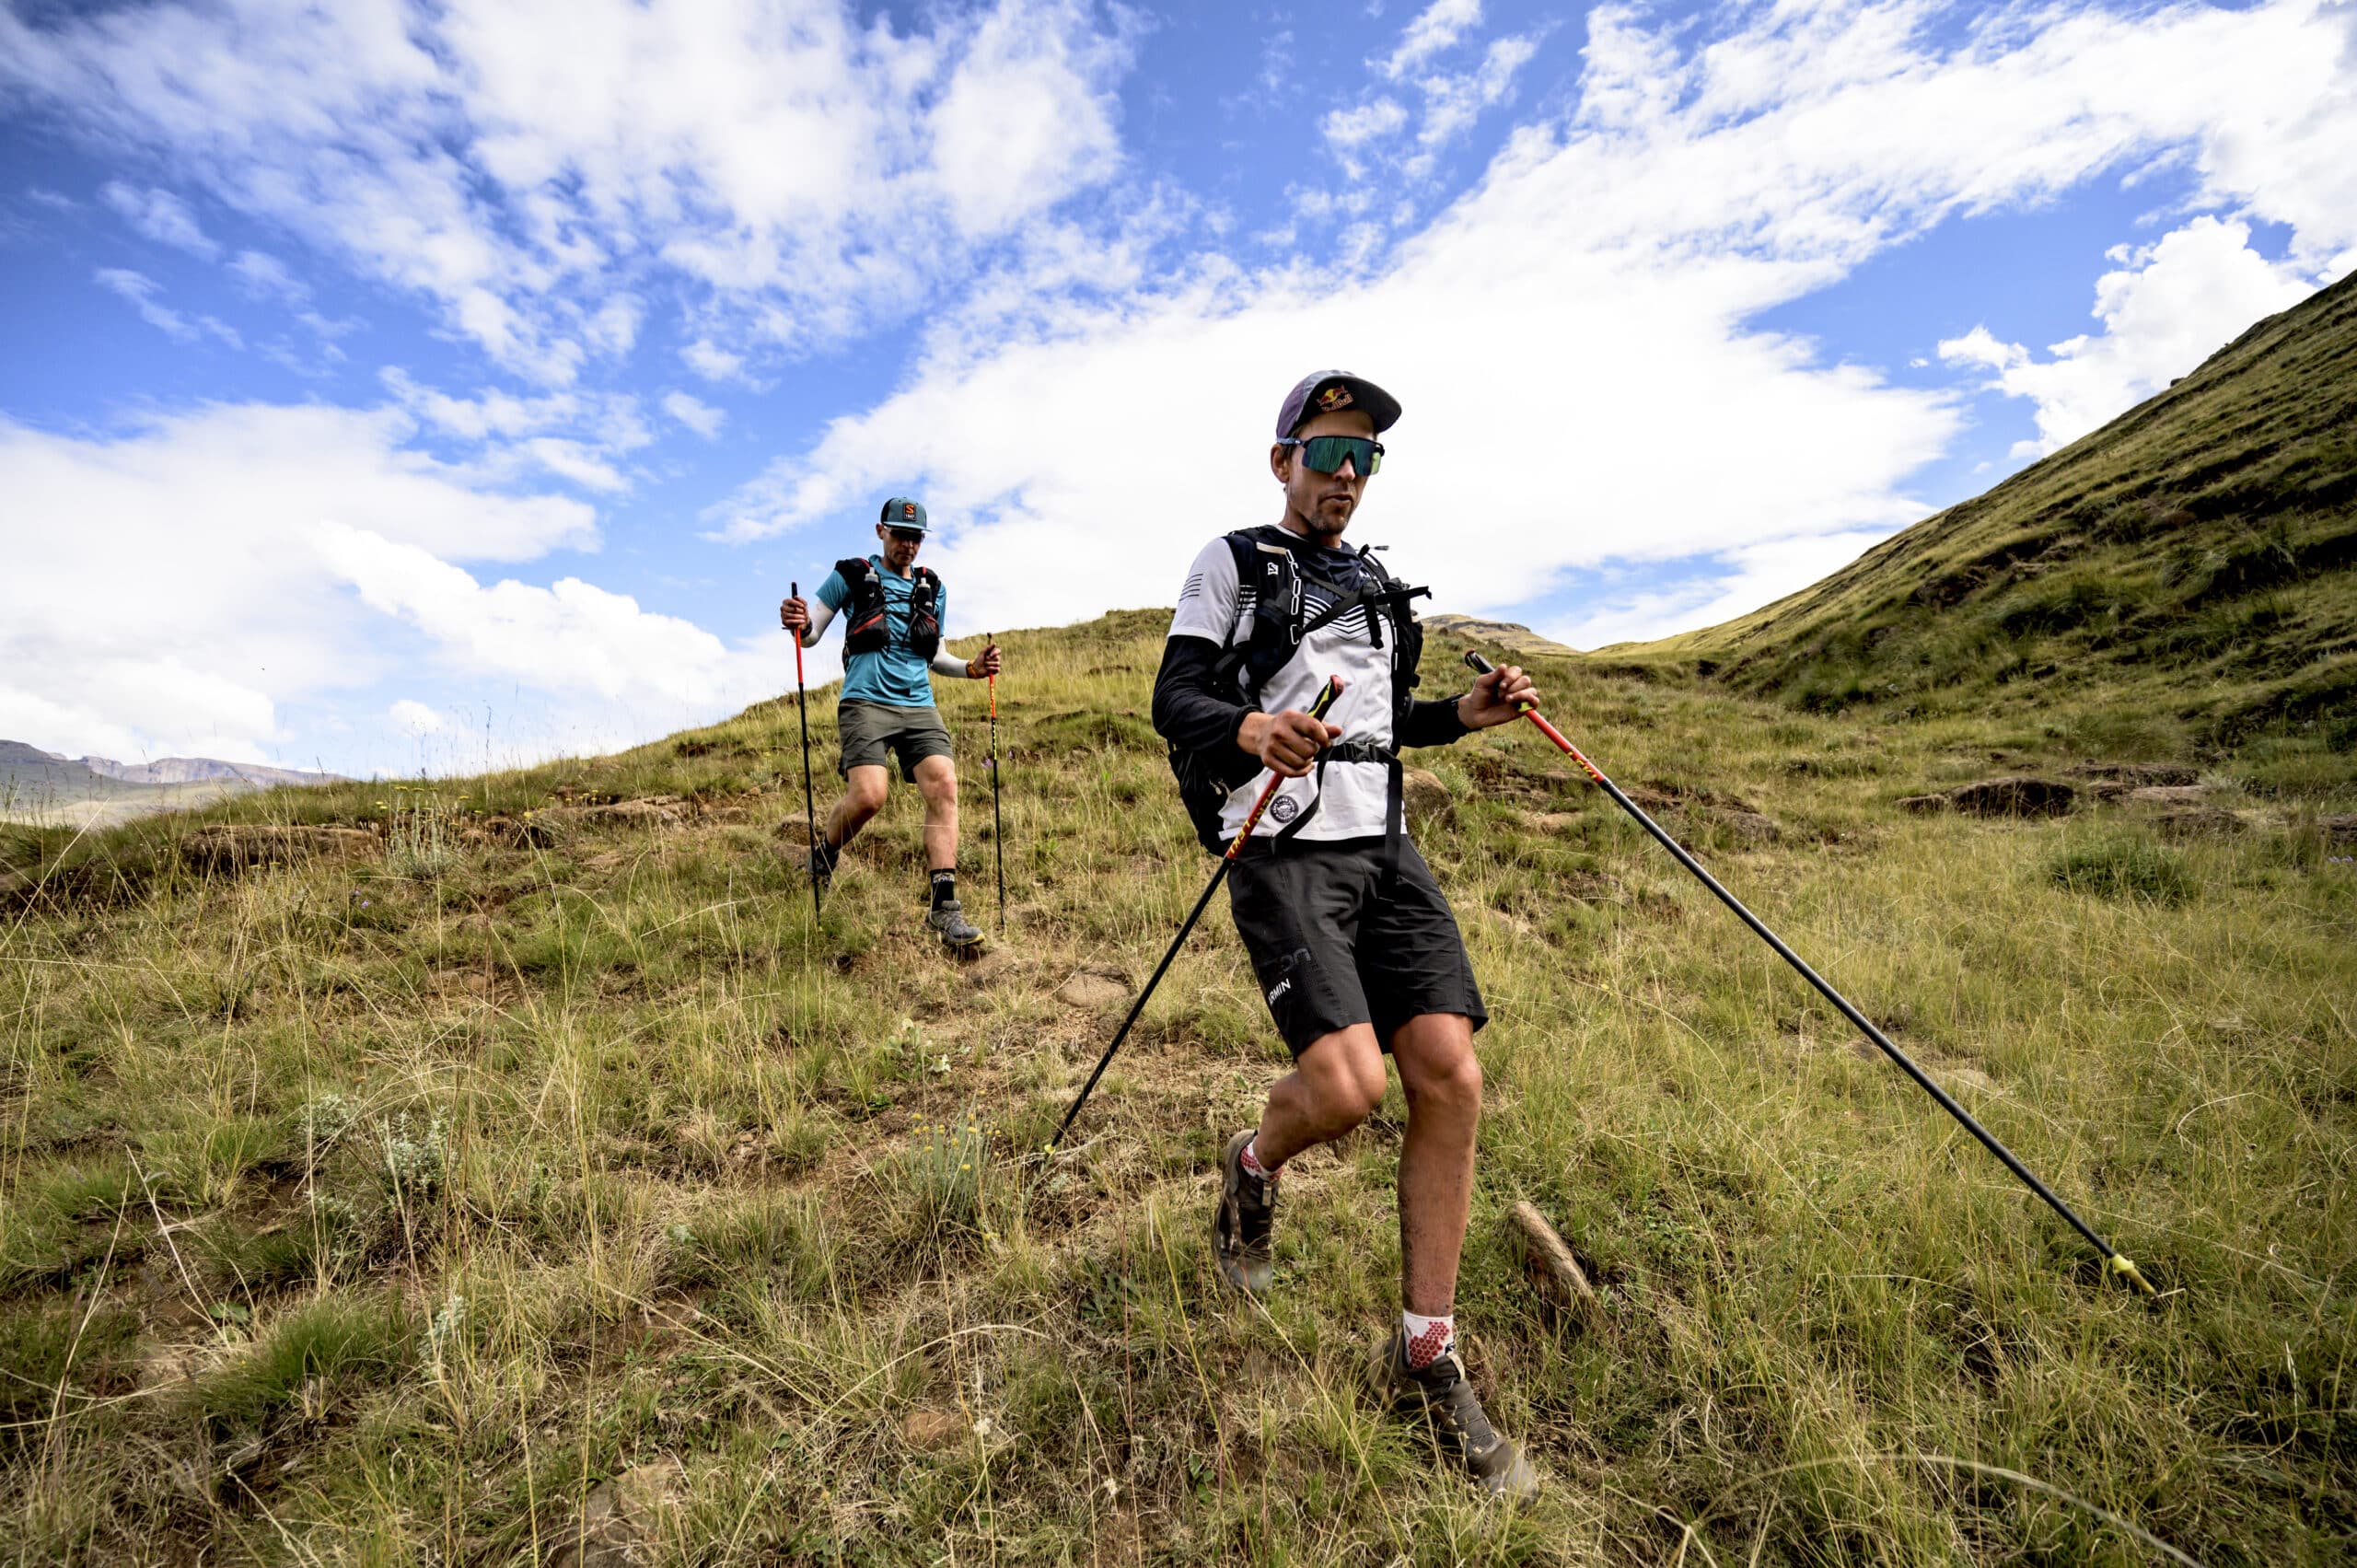 Ryno Griesel and Ryan Sandes with hydration packs and running poles for trail running